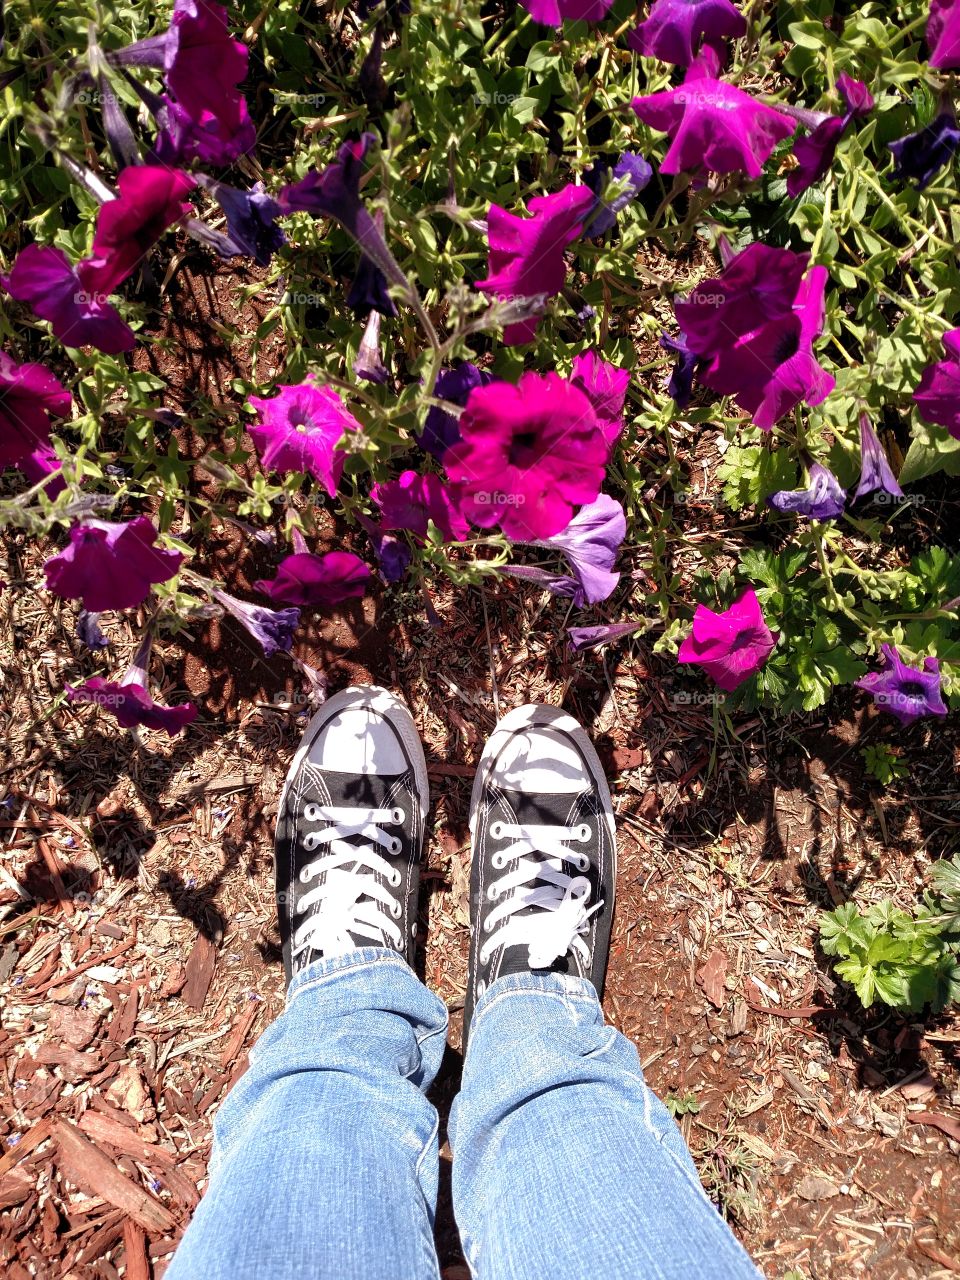 Standing in the Patunias